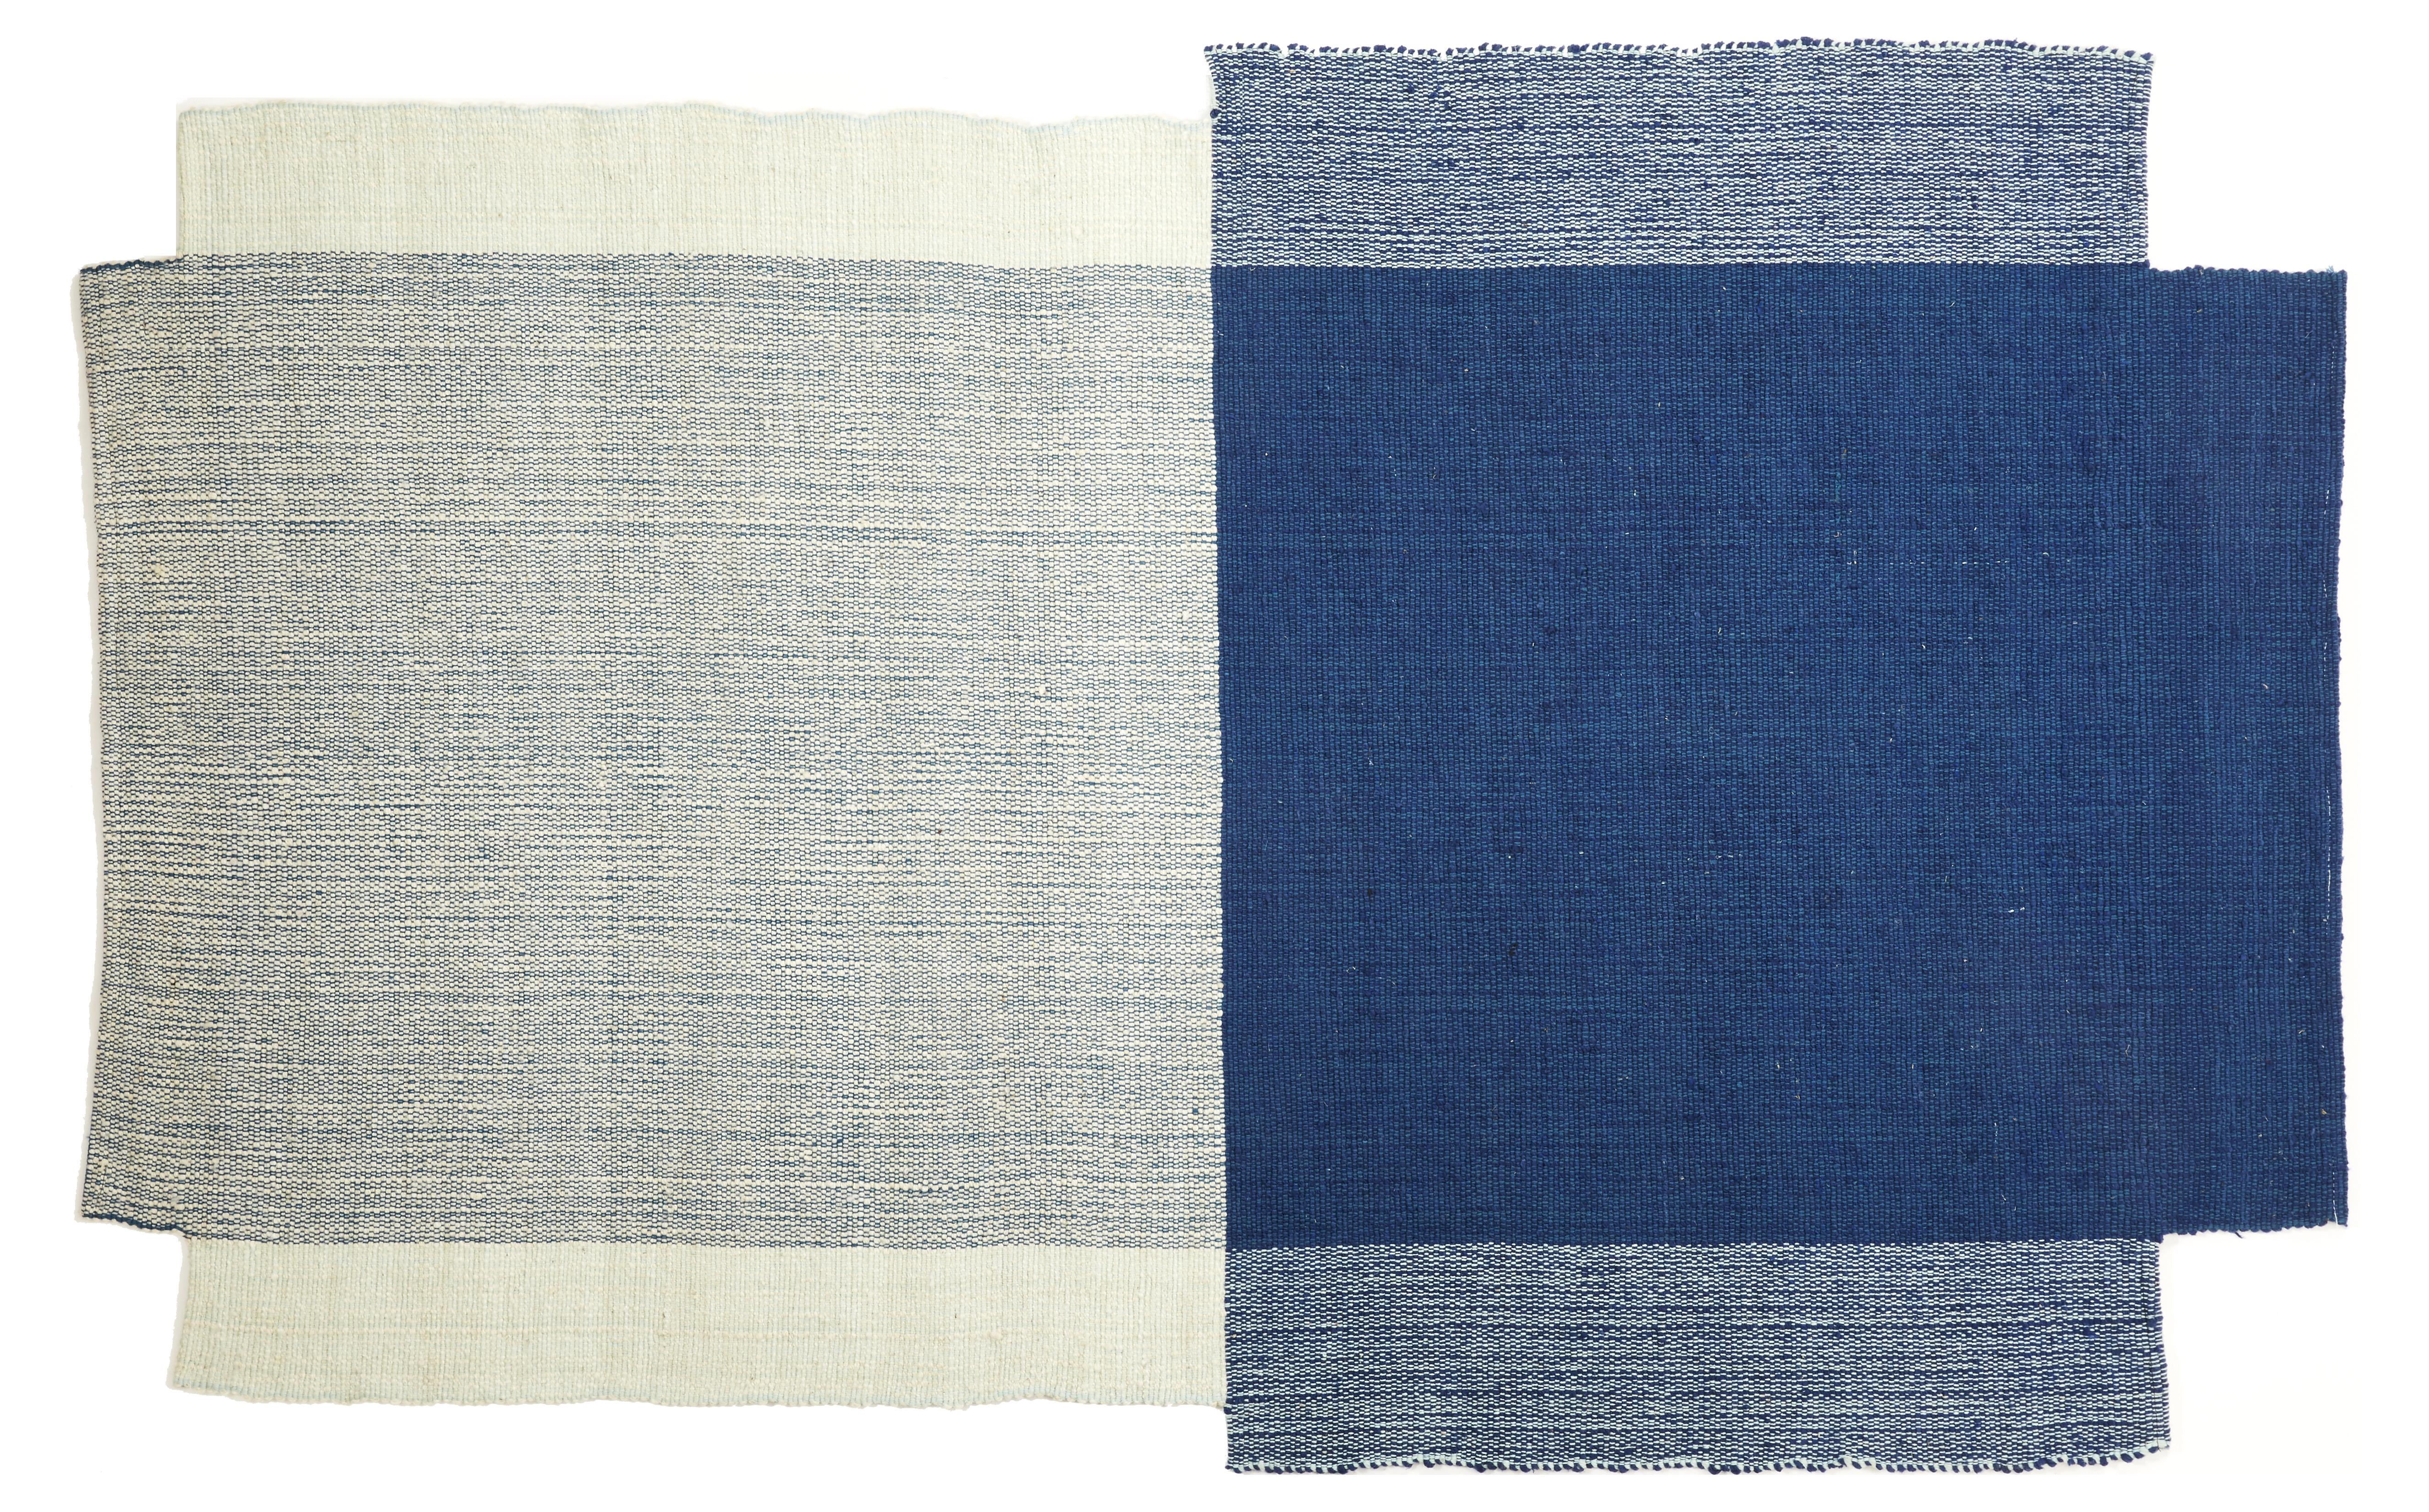 Small Nobsa rug by Sebastian Herkner
Materials: 100% natural virgin wool. 
Technique: Hand-woven in Colombia.
Dimensions: W 214 x L 130 cm 
Available in colors: grey/ grey/ cream, grey/ ochre/ cream, red/ ochre/ cream, blue/ mint/ cream, rose/